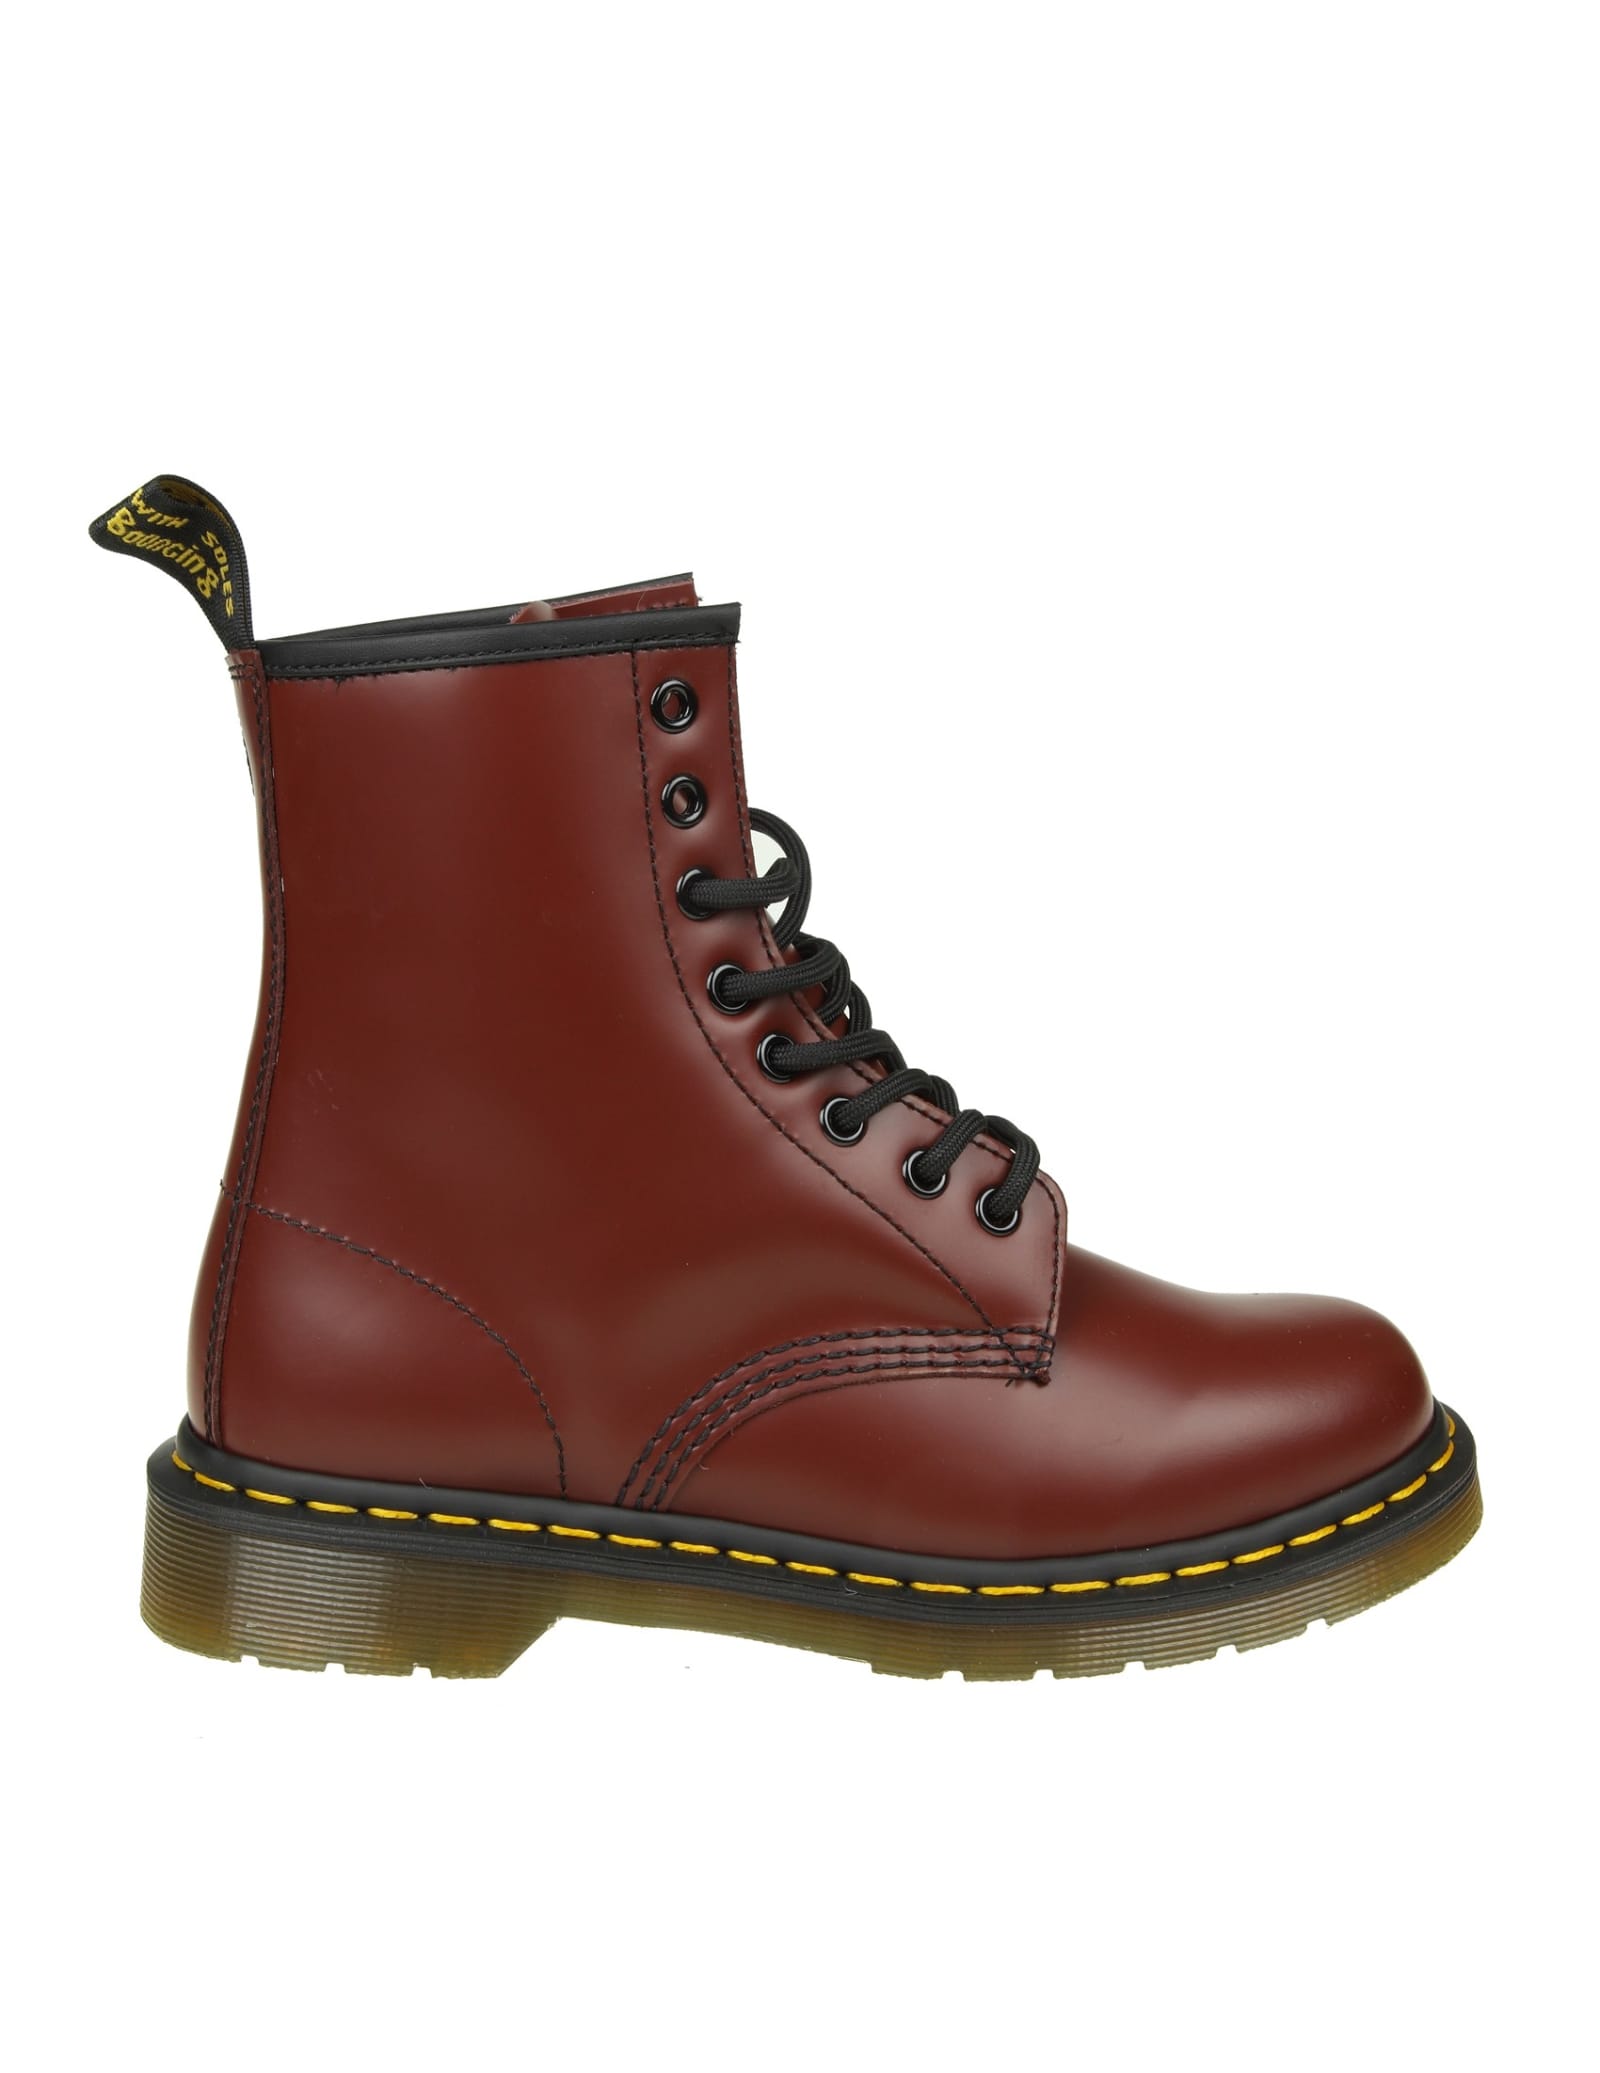 Dr. Martens Dr. martens Smooth Boots In Cherry Color Leather